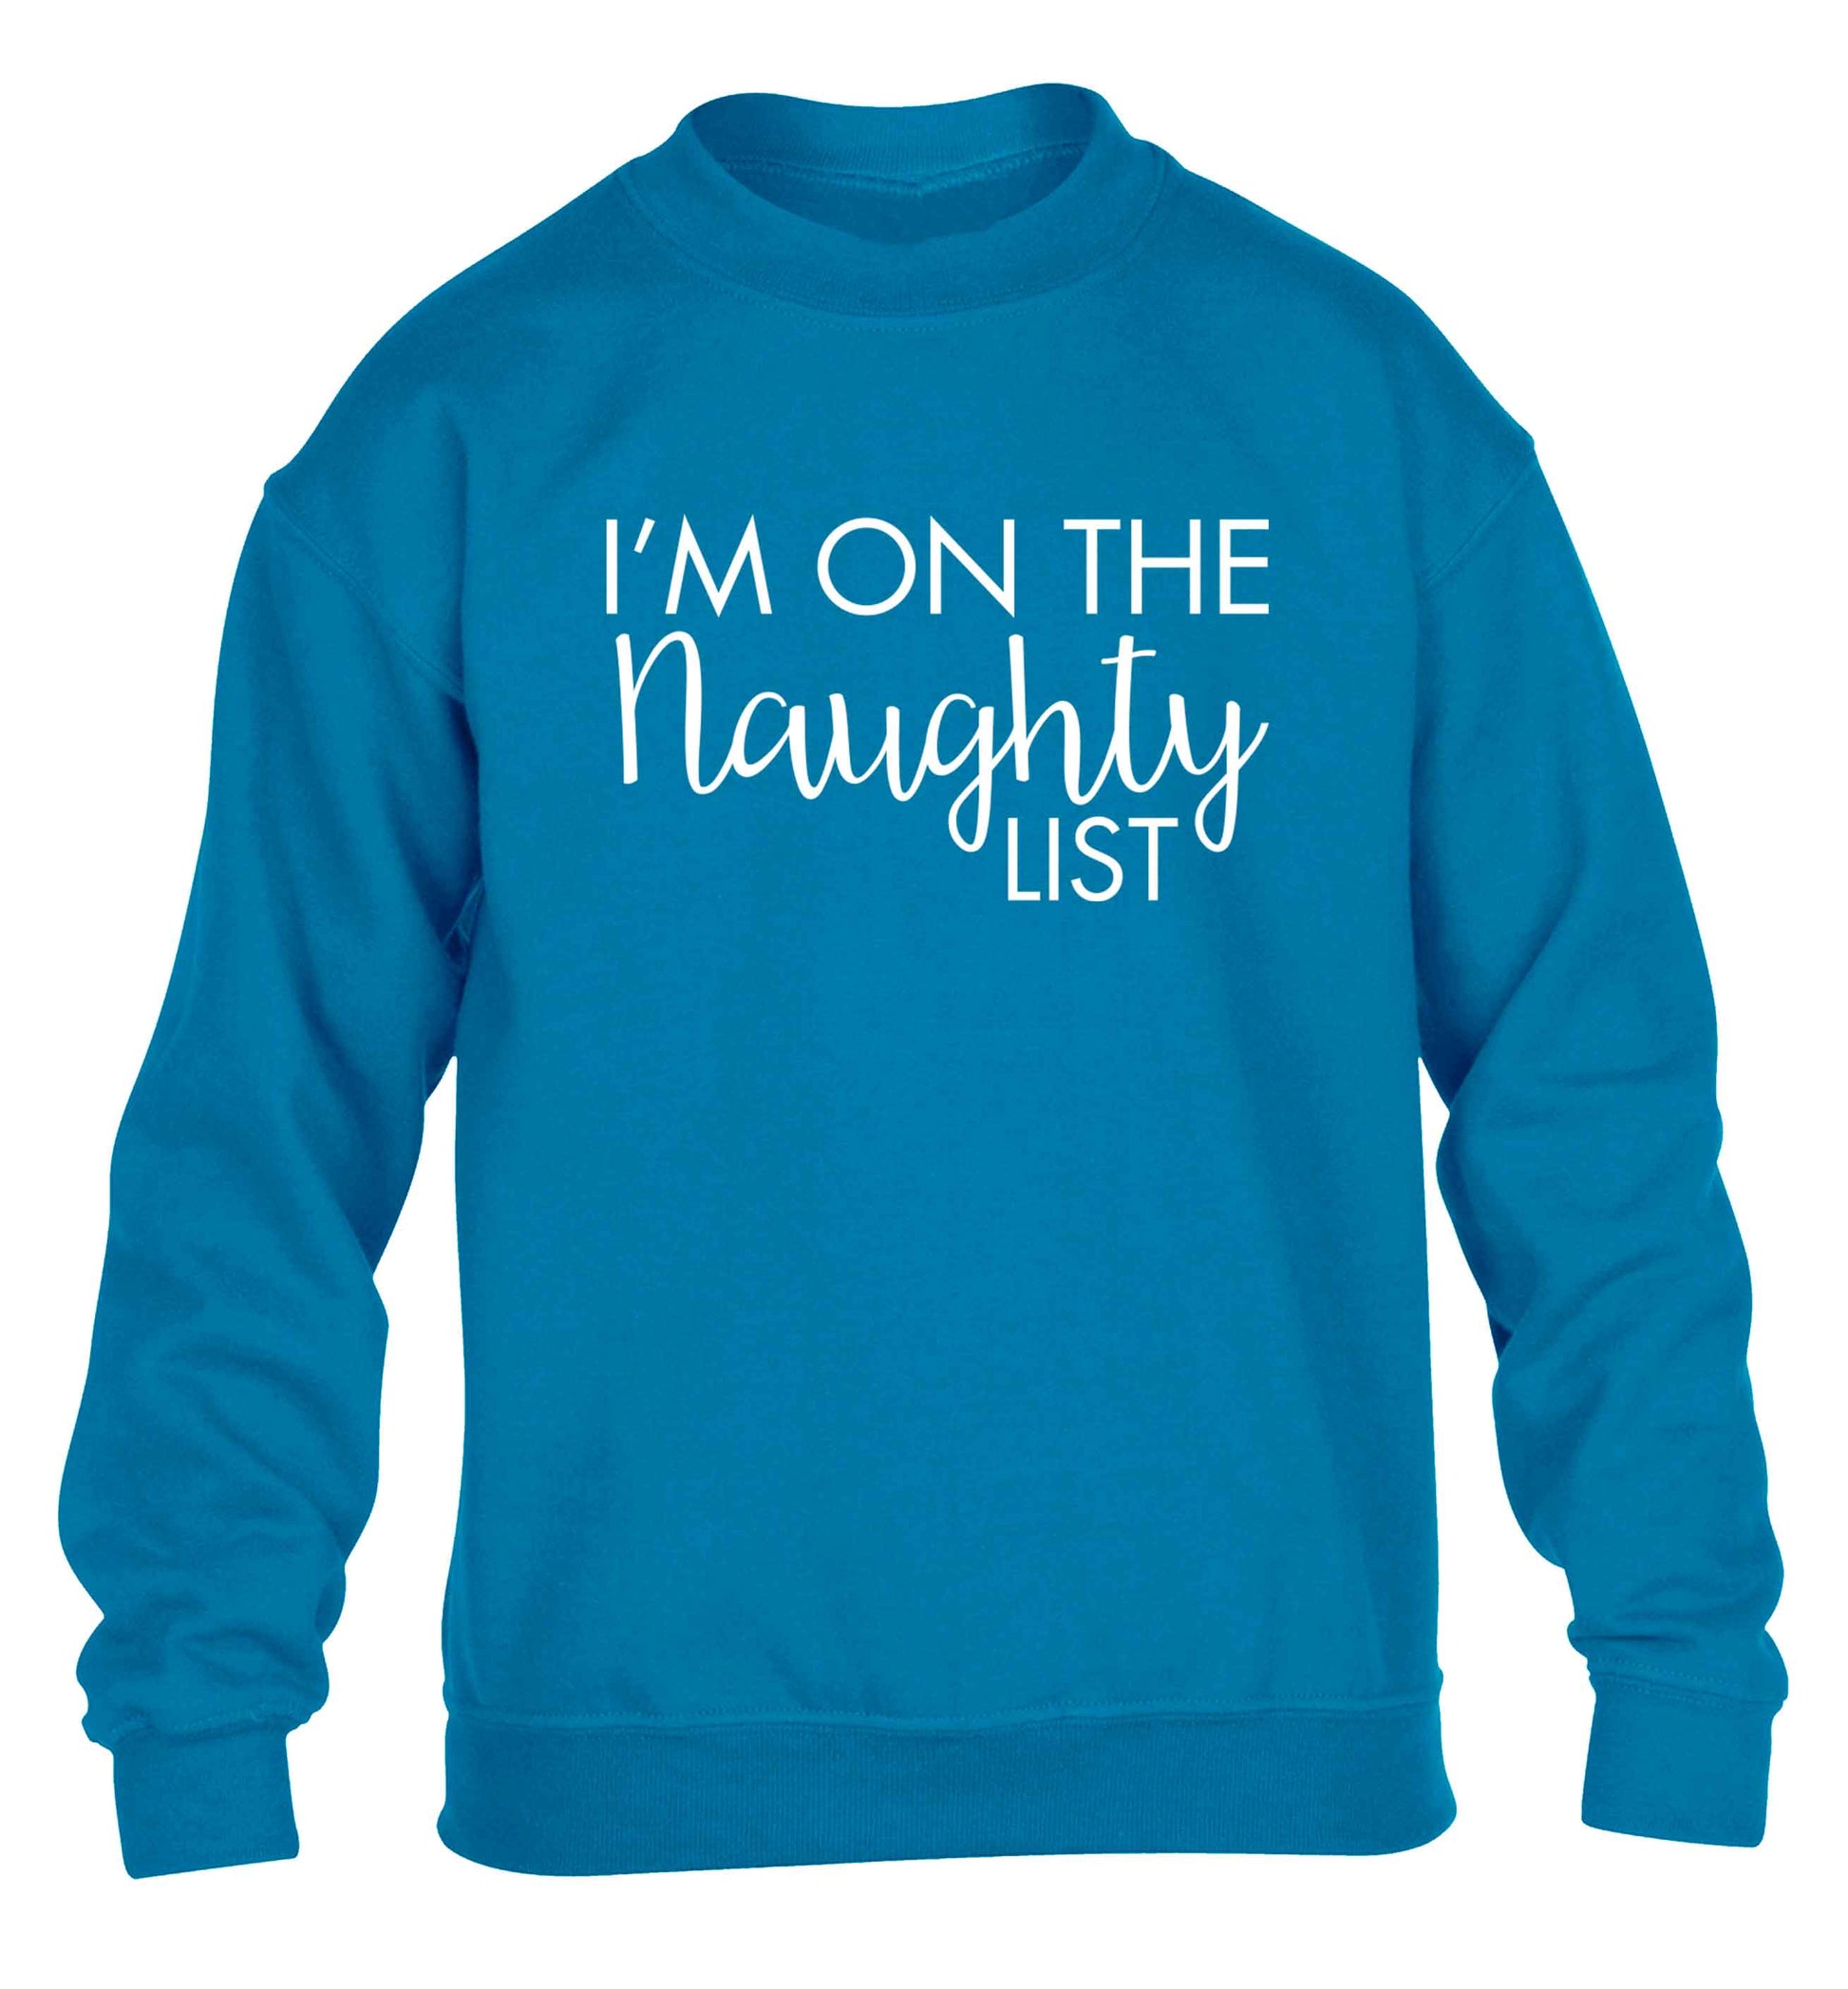 I'm on the naughty list children's blue sweater 12-13 Years